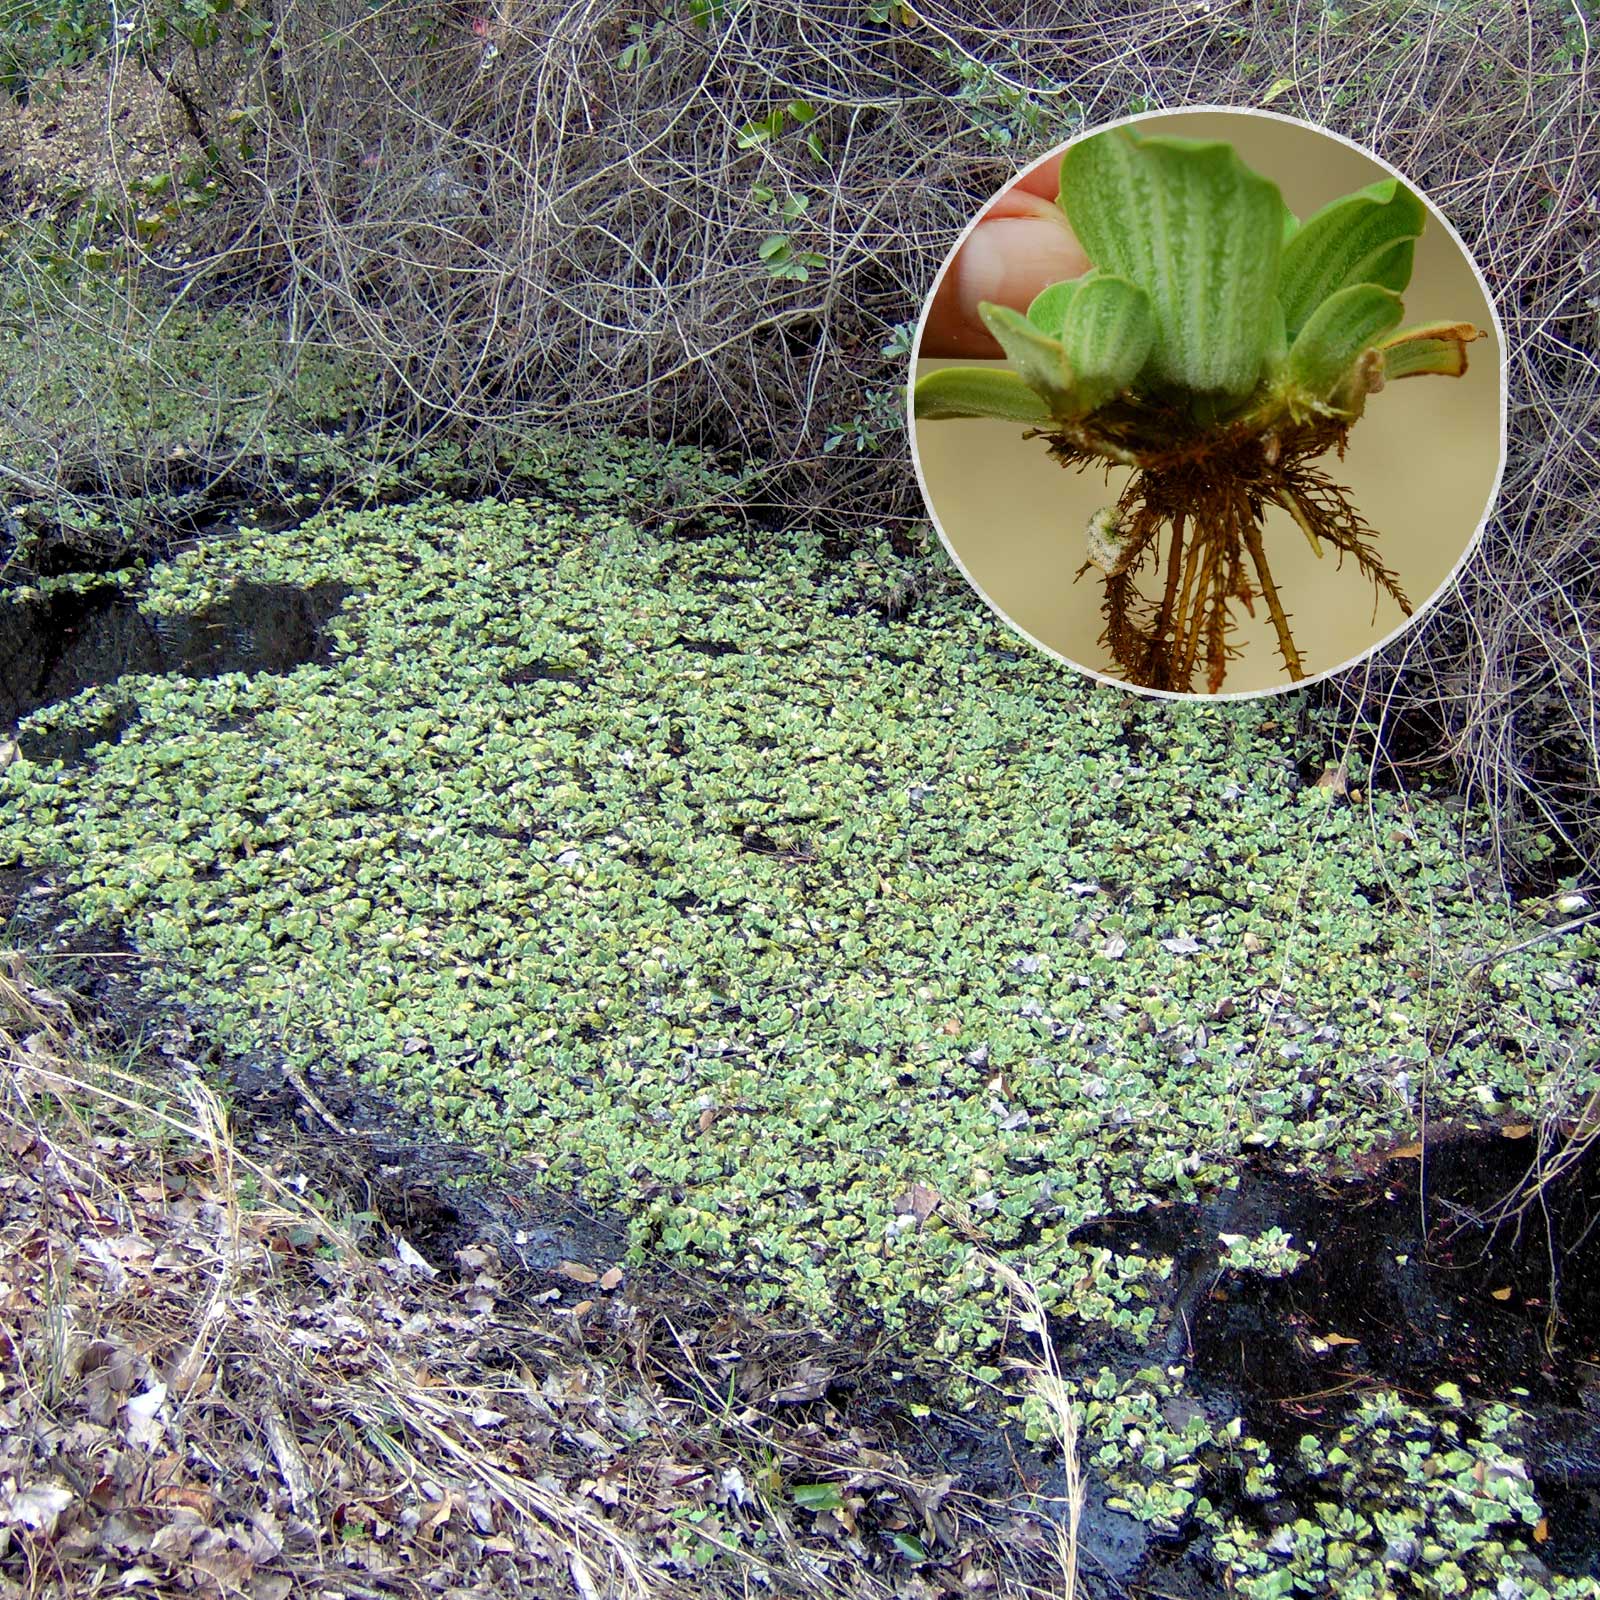 Water-Lettuce Vegetation Identification and Treatment by Pond Lake Management